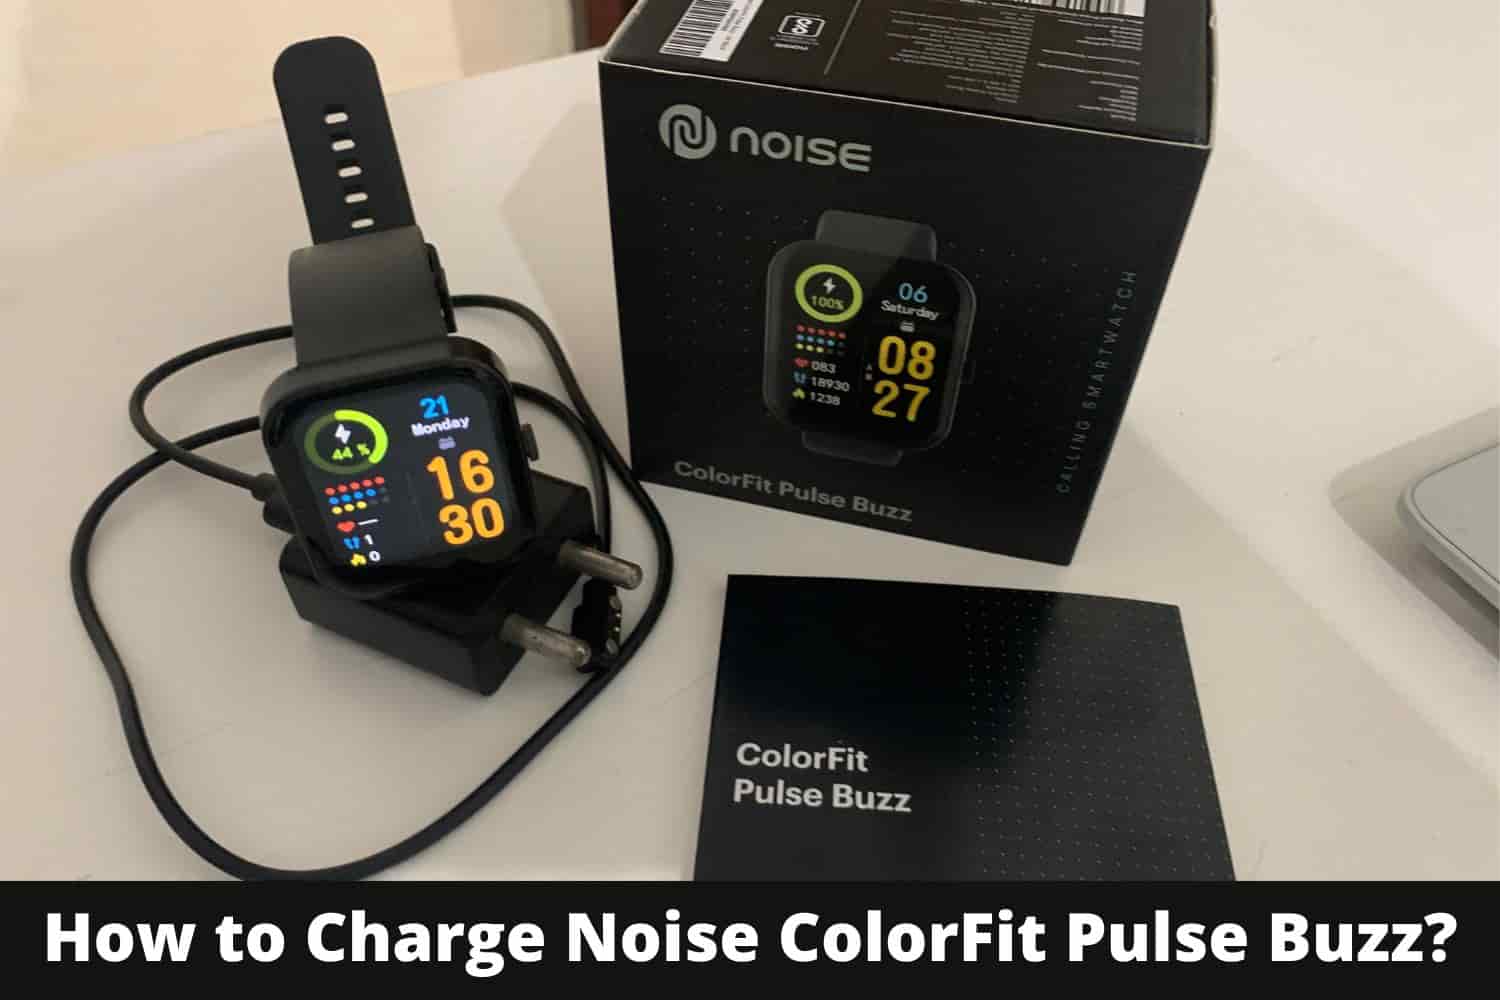 With magnetic charger and adaptor, you can Charge Noise ColorFit Pulse Buzz Smartwatch